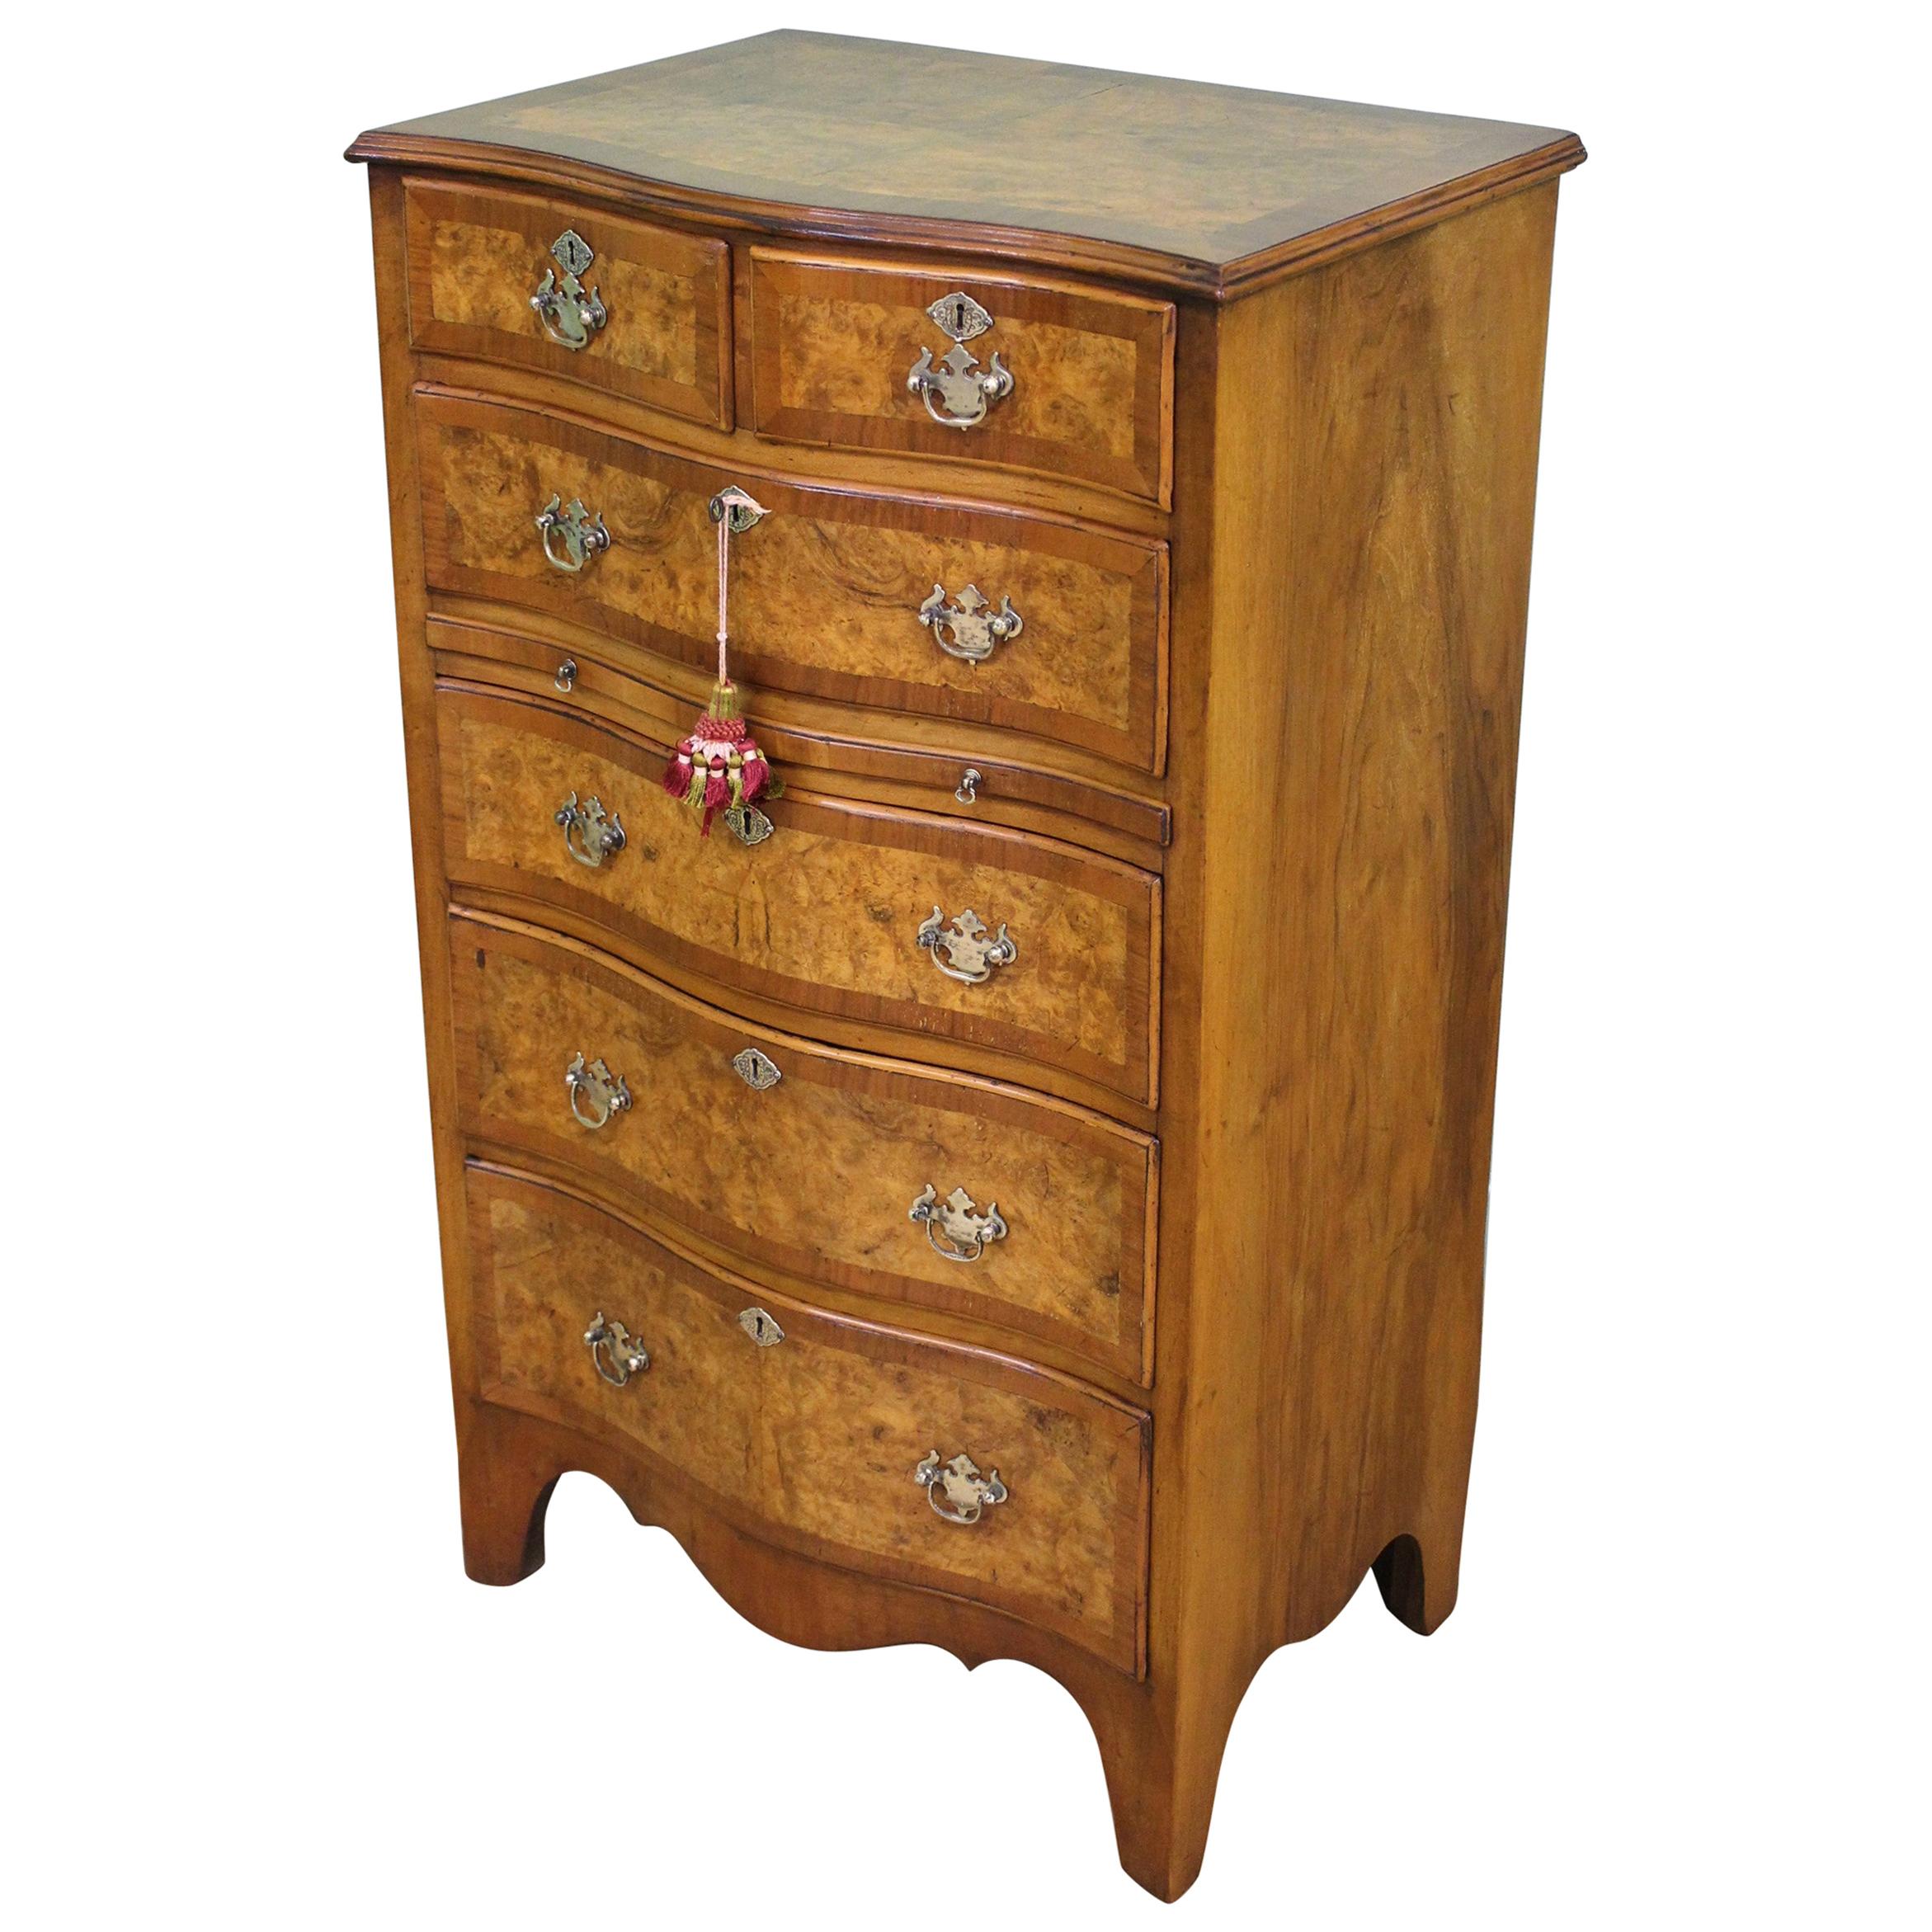 English Burr Walnut Serpentine Fronted Chest of Drawers